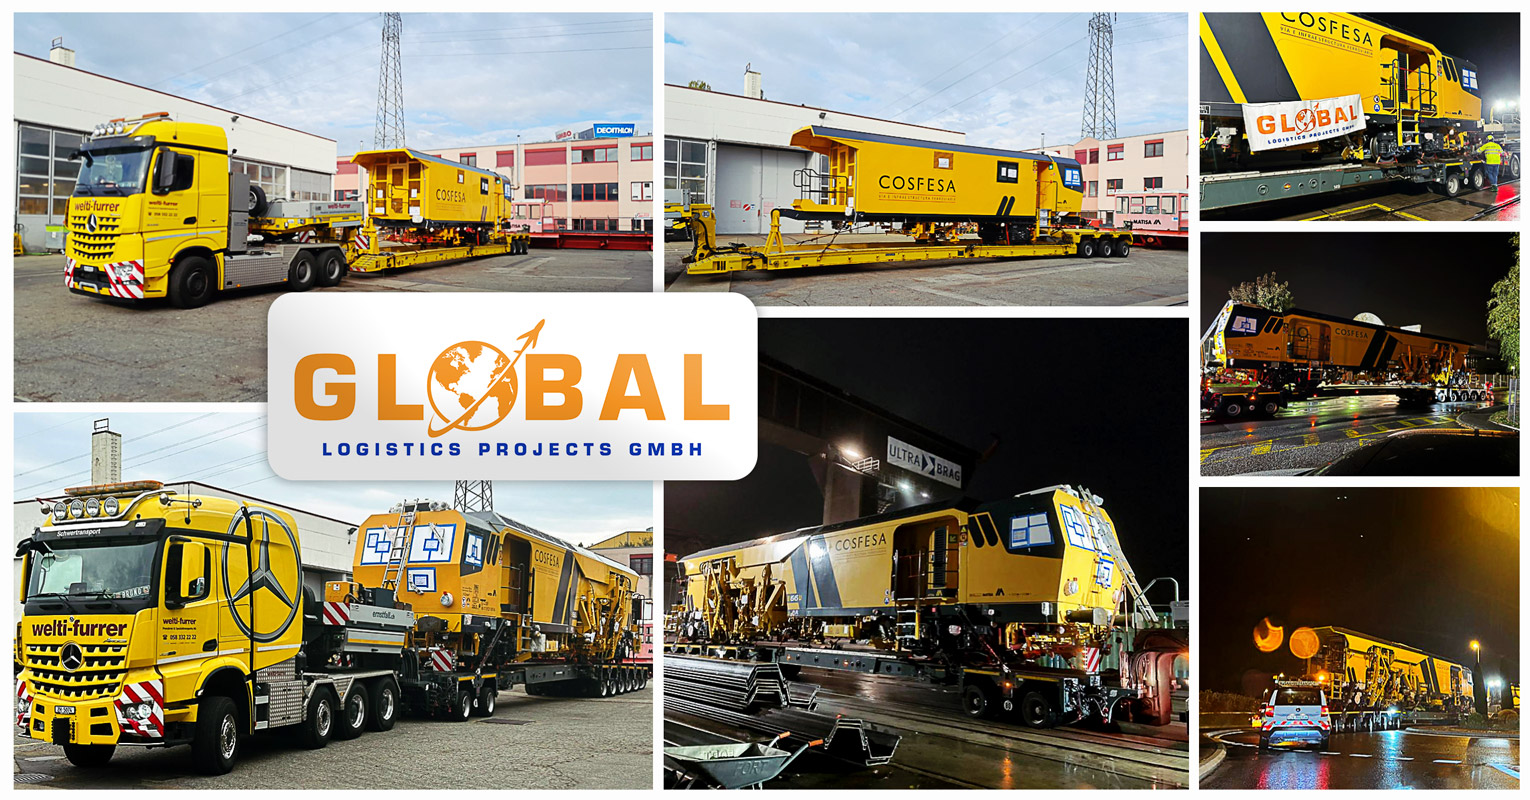 Global Logistics Projects loaded a tamping machine consisting of the machine and the trailer type B66 from Switzerland to Spain by truck and sea freight